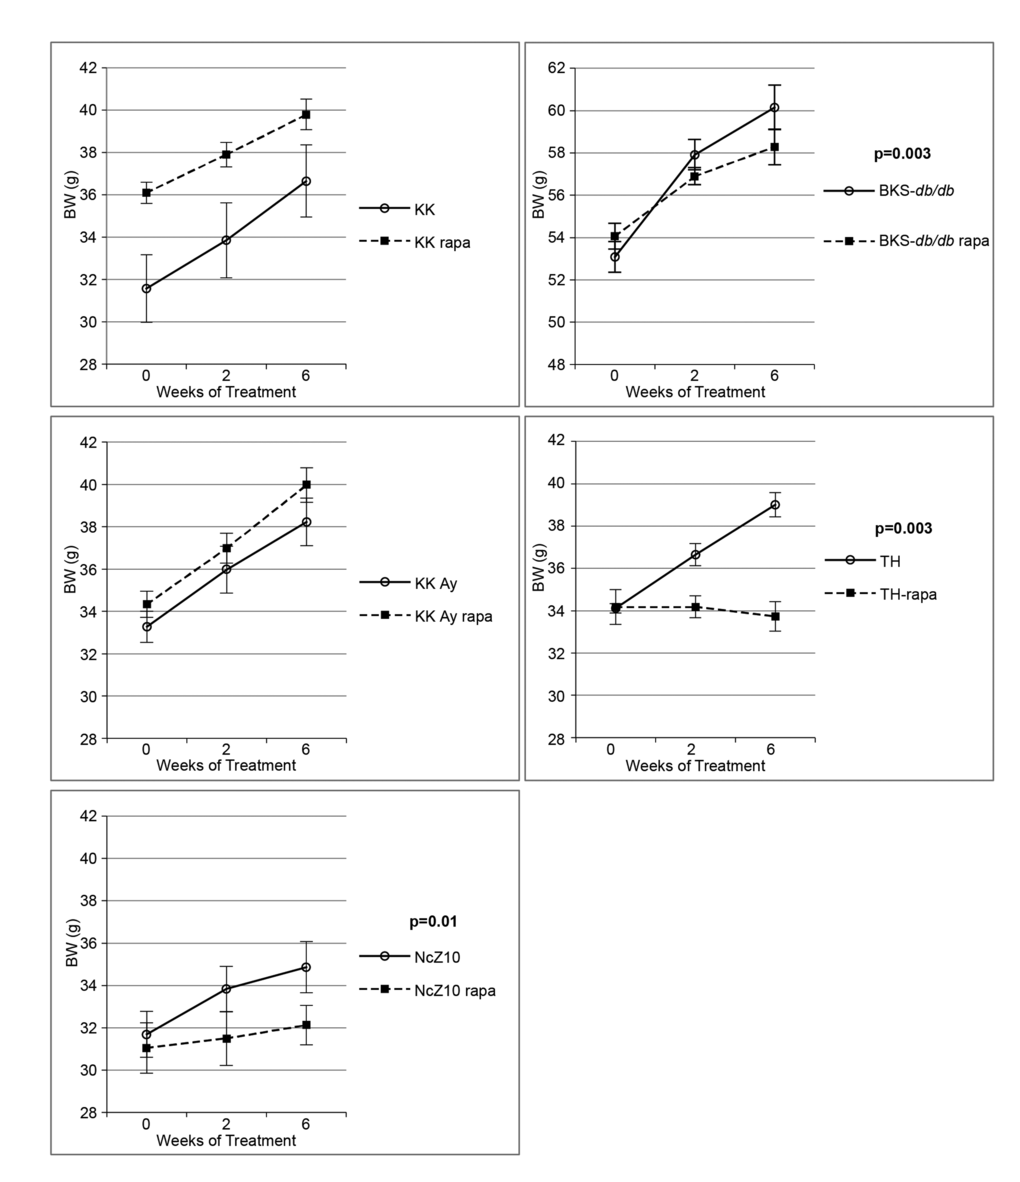 Effect of rapamycin on body weight gain in 5 diabesity models. Rapamycin significantly reduces body weight gain in NcZ10, BKS-db/db, and TH strains, but not in KK-Ay or KK strains. P values are given for repeated measures MANOVA (n = 5–6 per strain/treatment group, except n = 11 for both NcZ10 groups). Note that the Y-axis scale for BKS-db/db is over a different 14-g span than the other 4 strains.